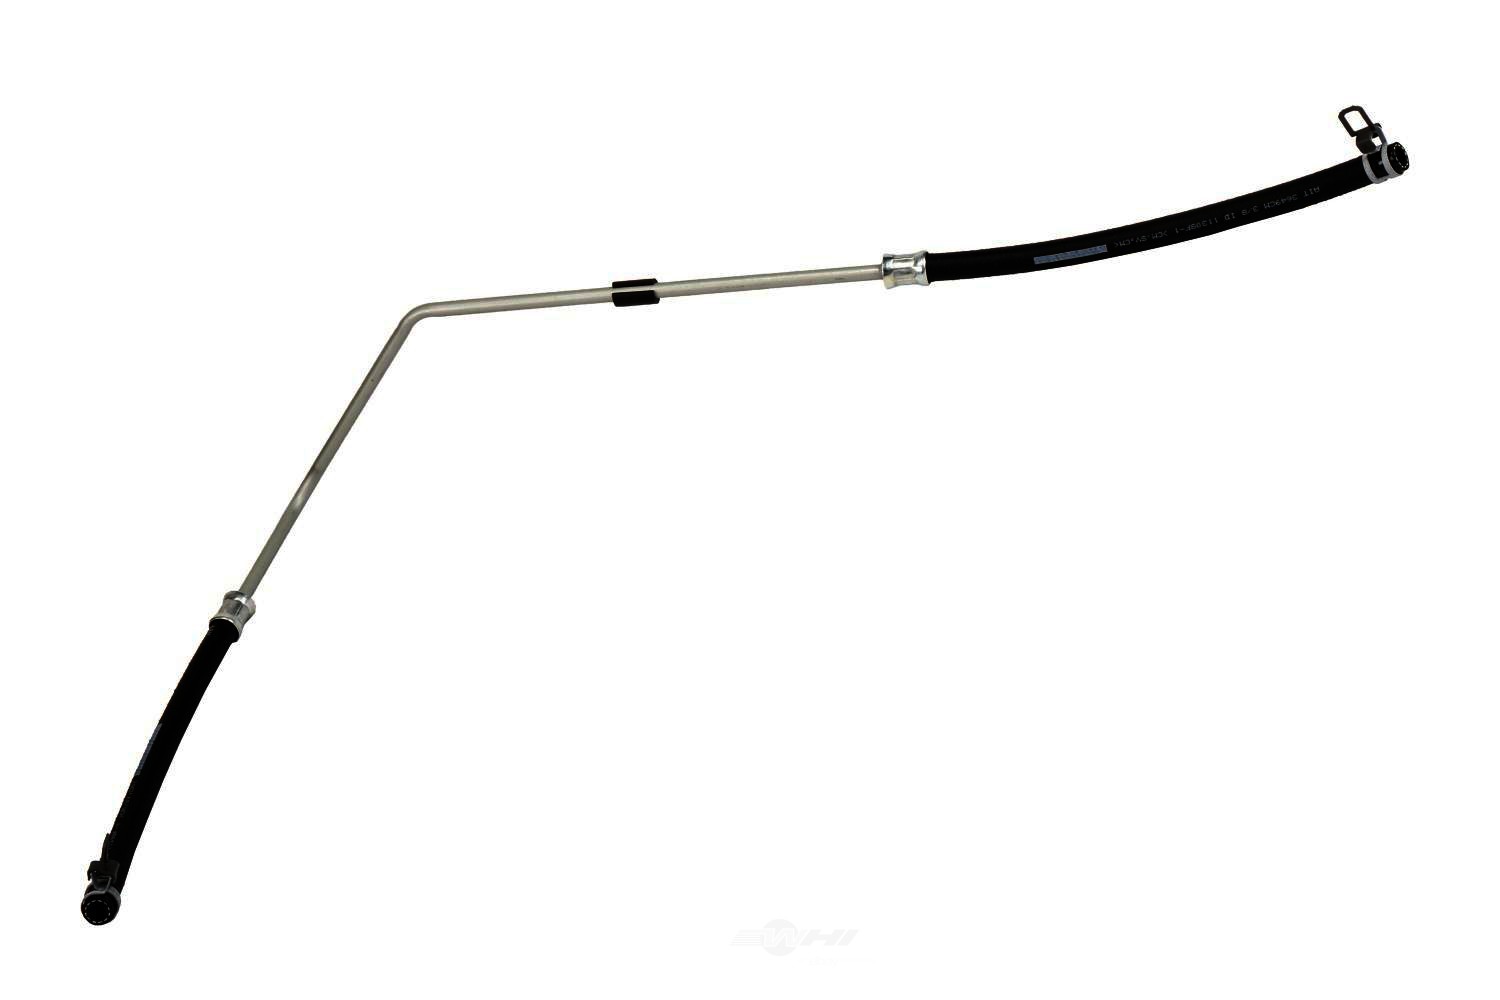 GM GENUINE PARTS CANADA - Power Steering Return Line Hose Assembly - GMC 26087520